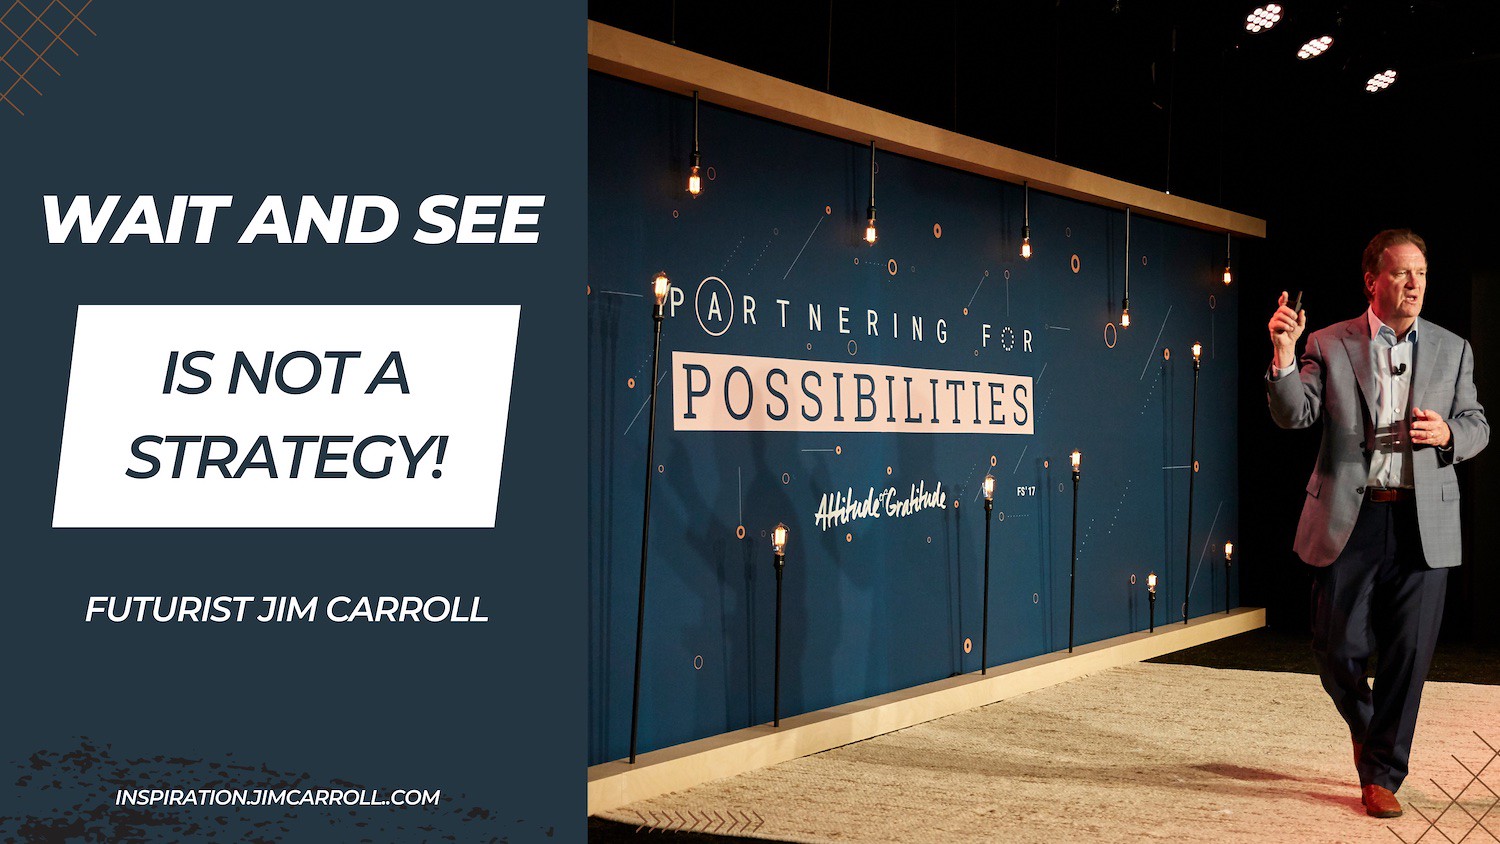 "Wait and see is not a strategy!" - Futurist Jim Carroll